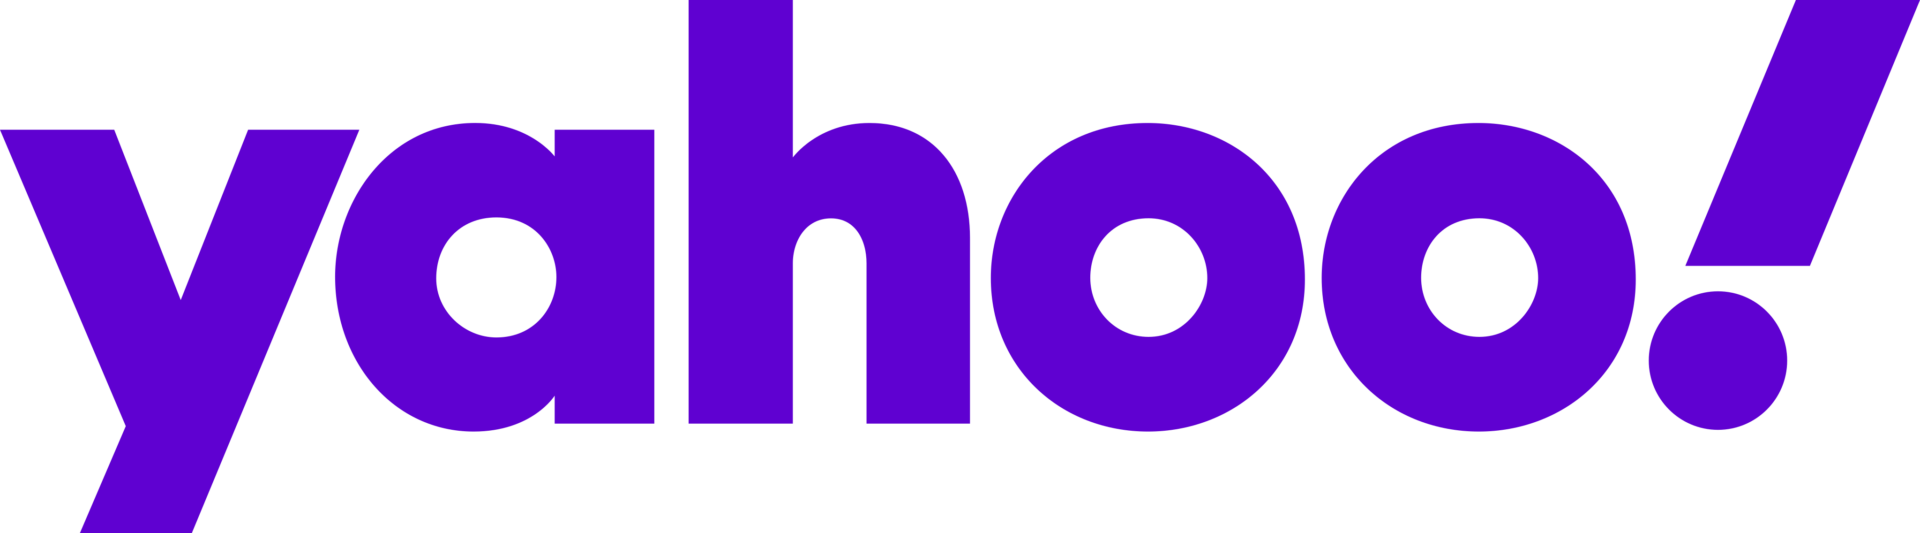 http://sarahwilliams.tv/wp-content/uploads/2021/10/yahoo-logo.png